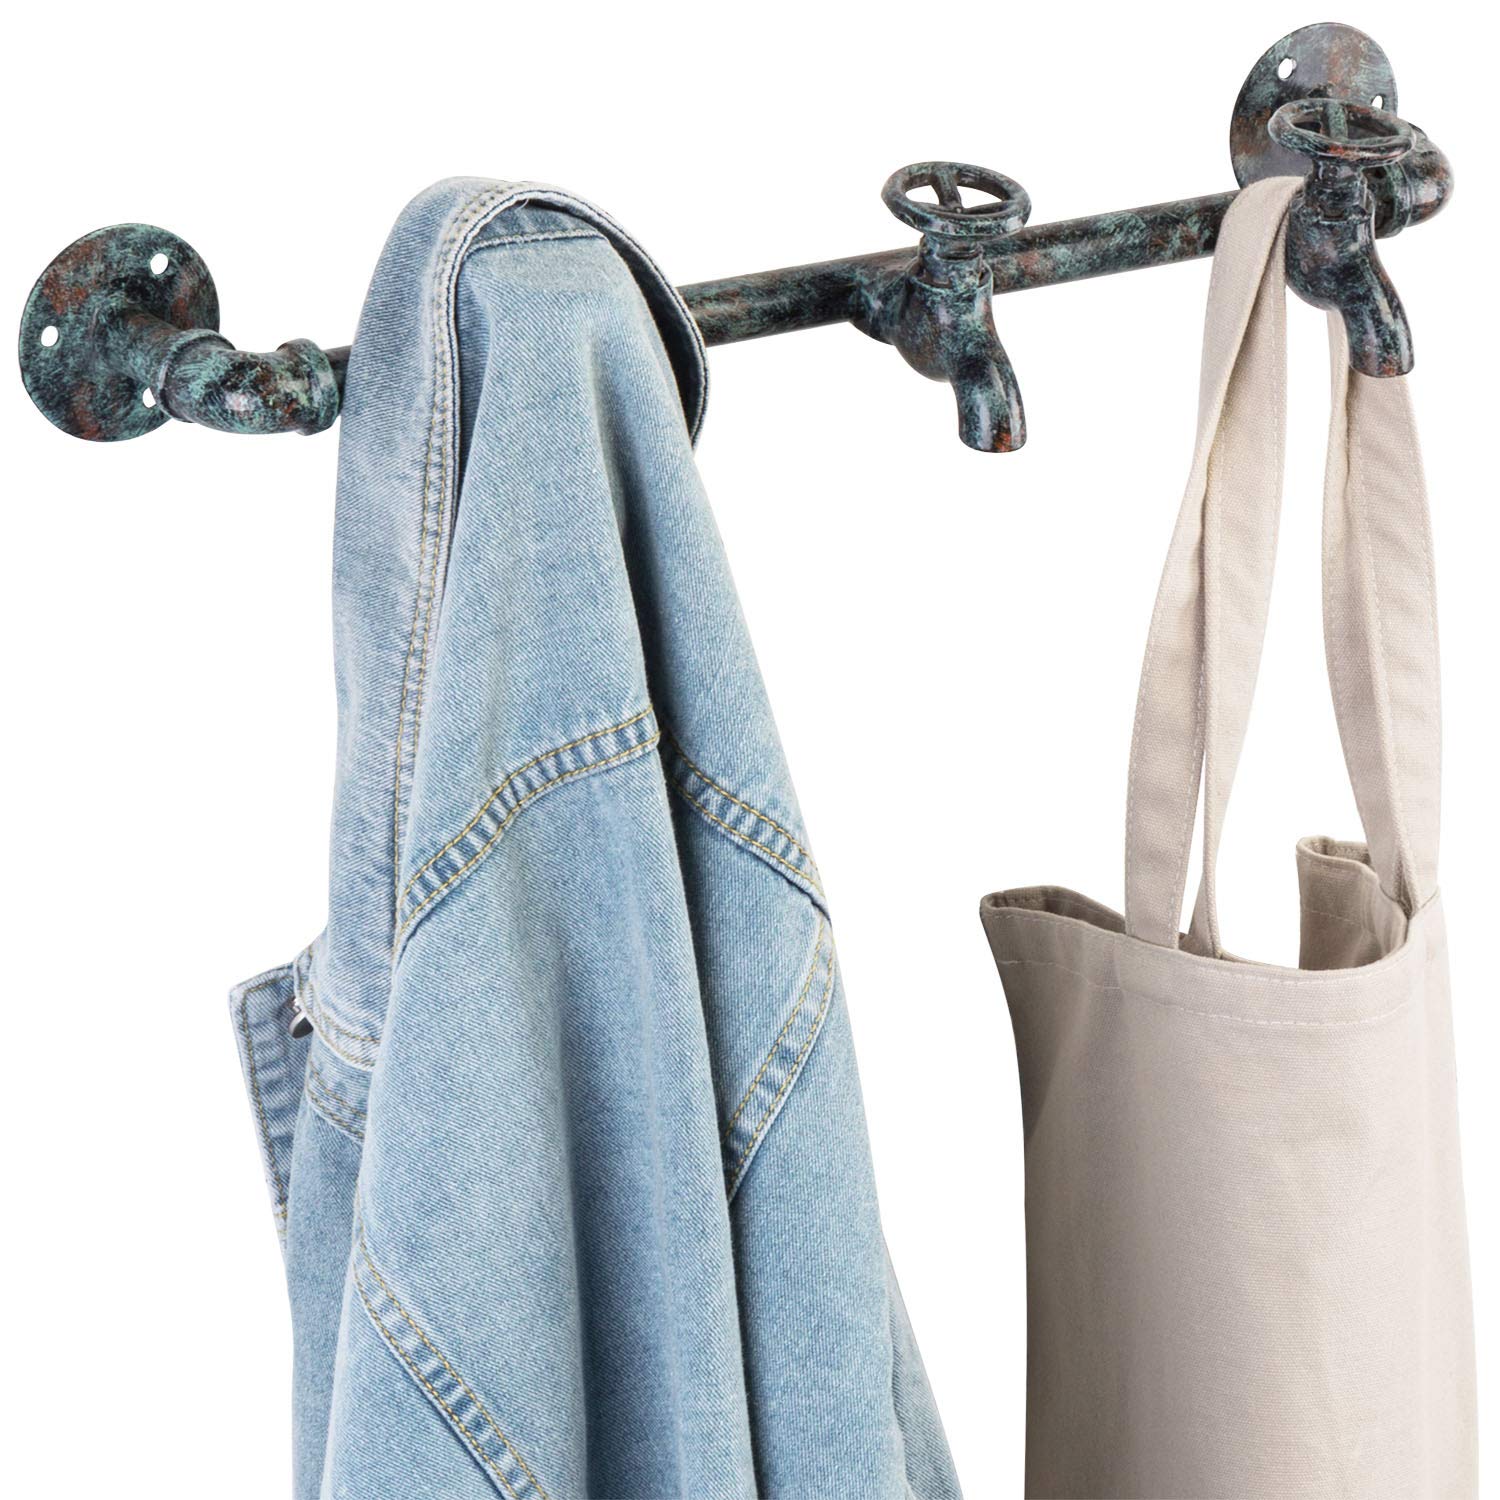 MyGift Rustic Industrial Faucet & Pipe Wall Mounted Iron Coat Hooks Garment Hanger/Towel Rack Bar - Turquoise